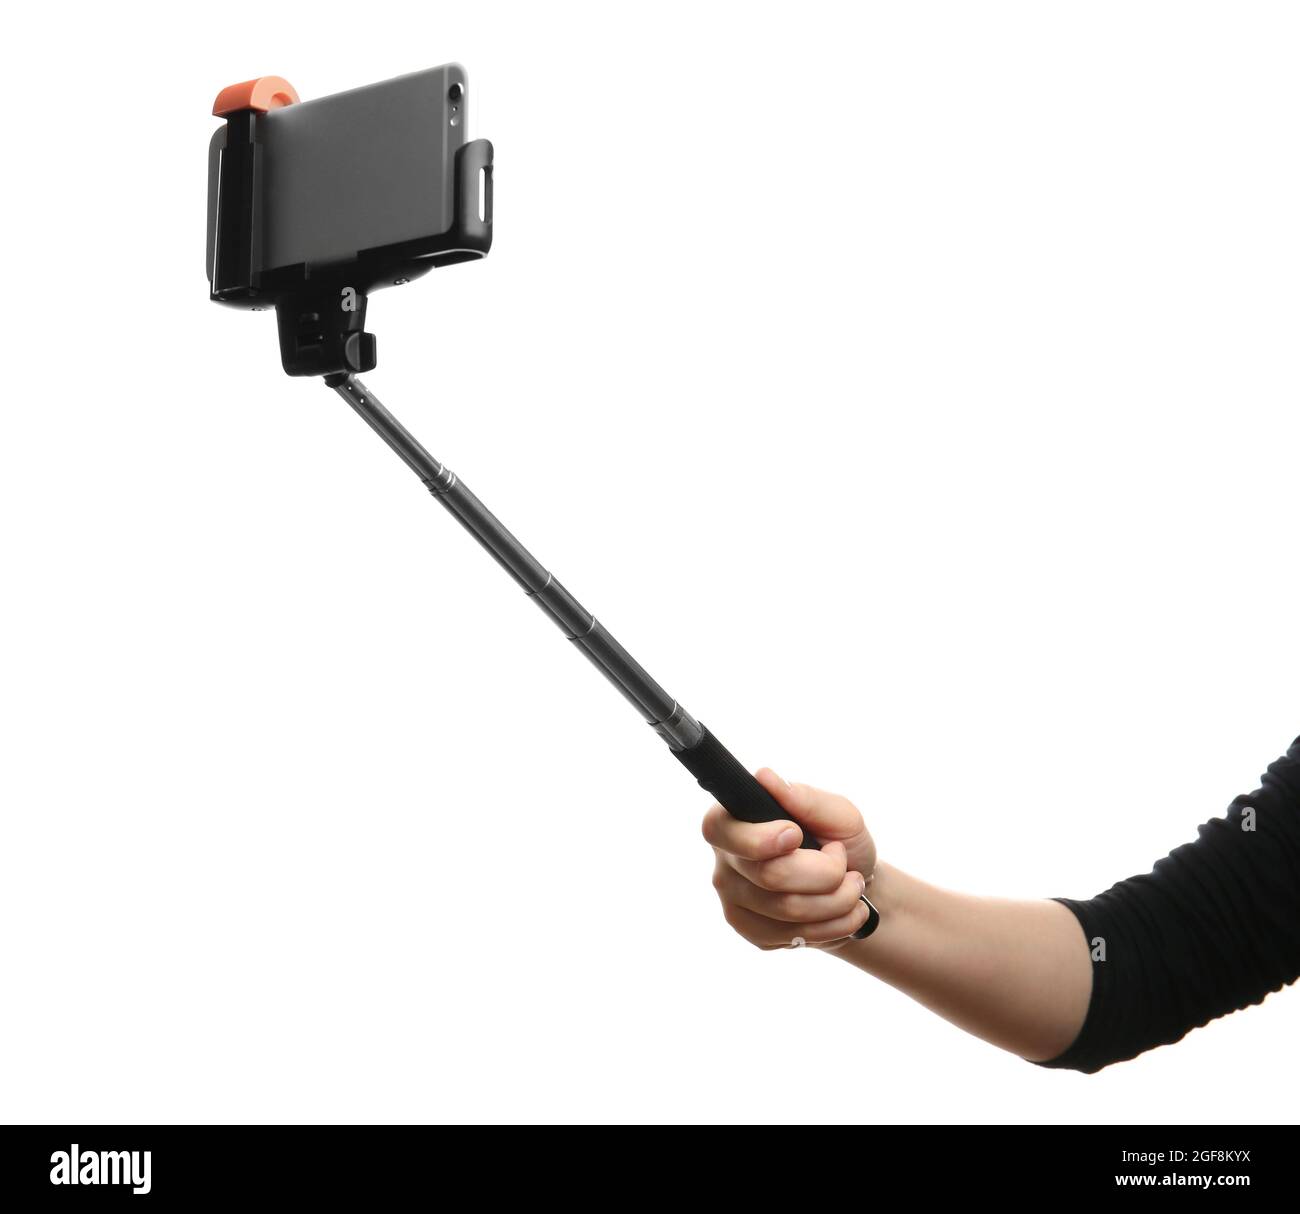 Hand holding stick for making photo with mobile phone, isolated on white  Stock Photo - Alamy